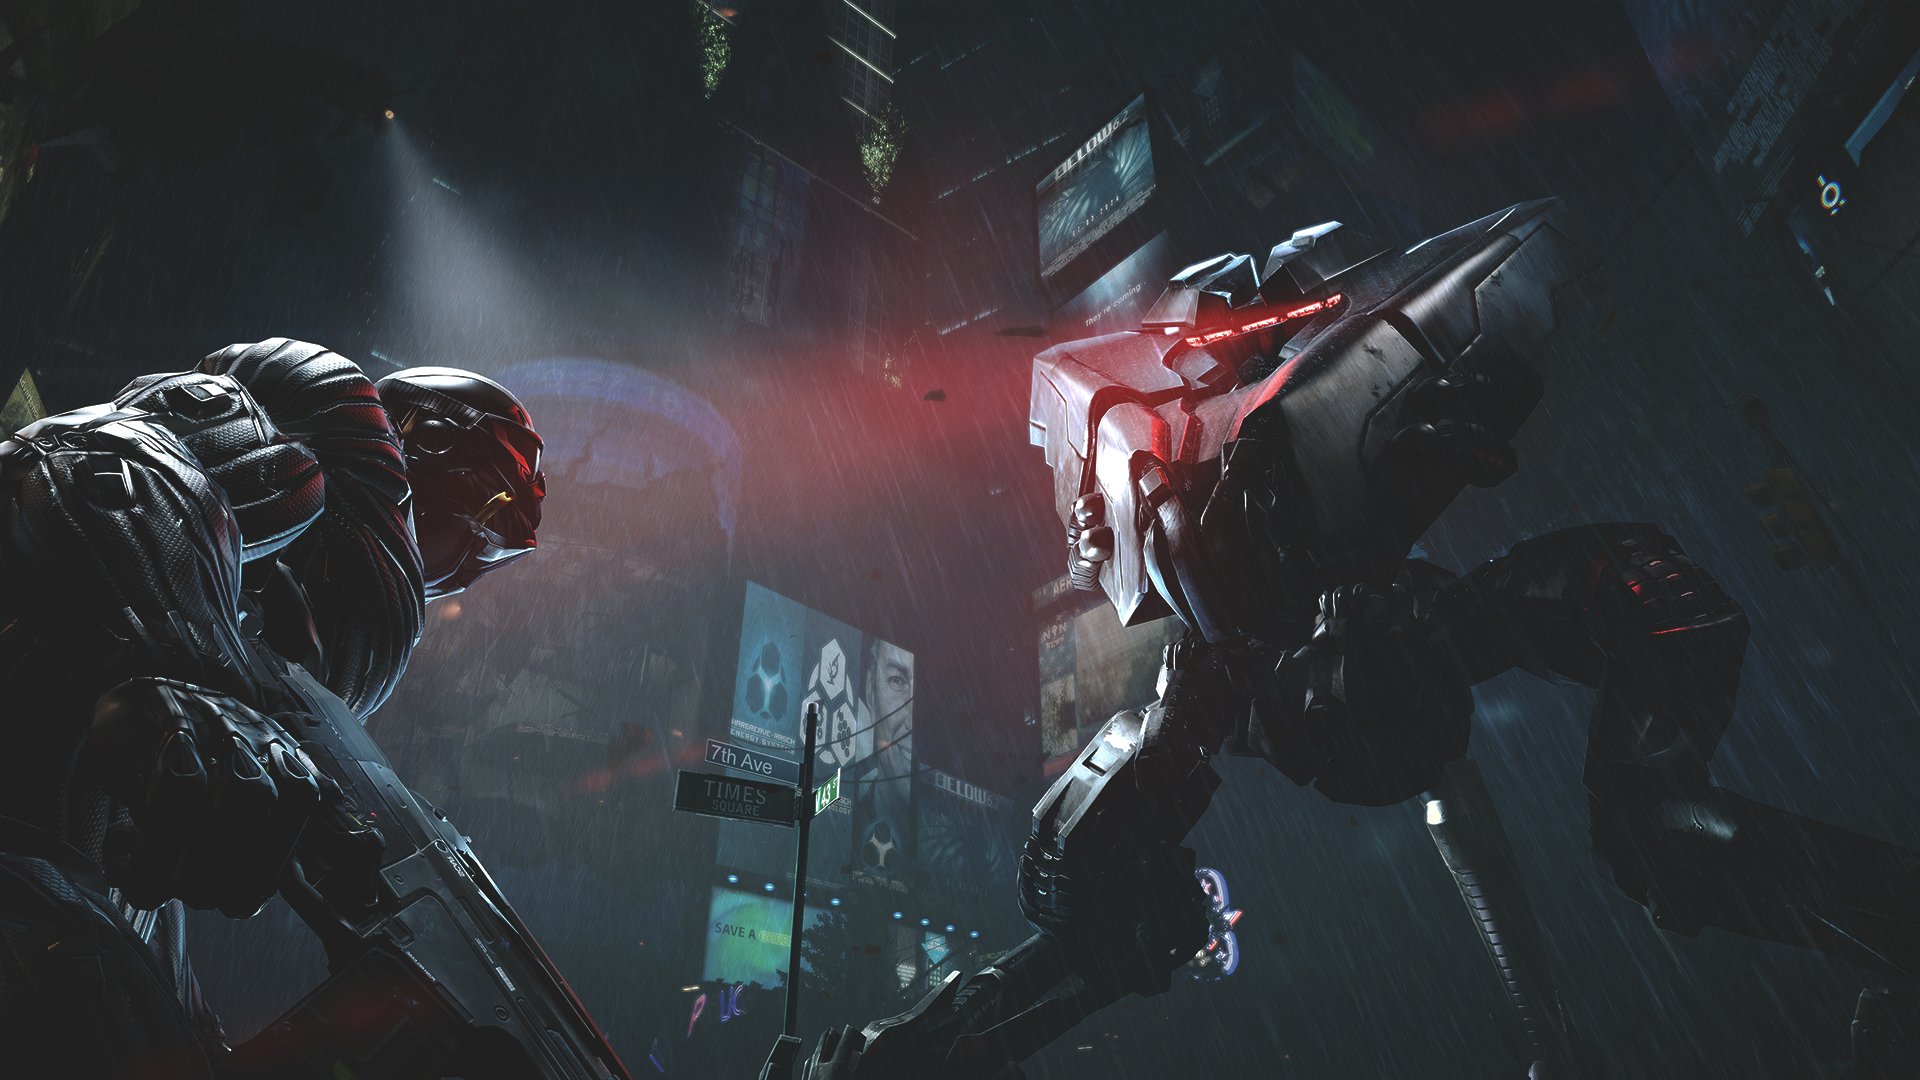 Crysis 2 and 3 Remastered photo mods get a takedown from Crytek